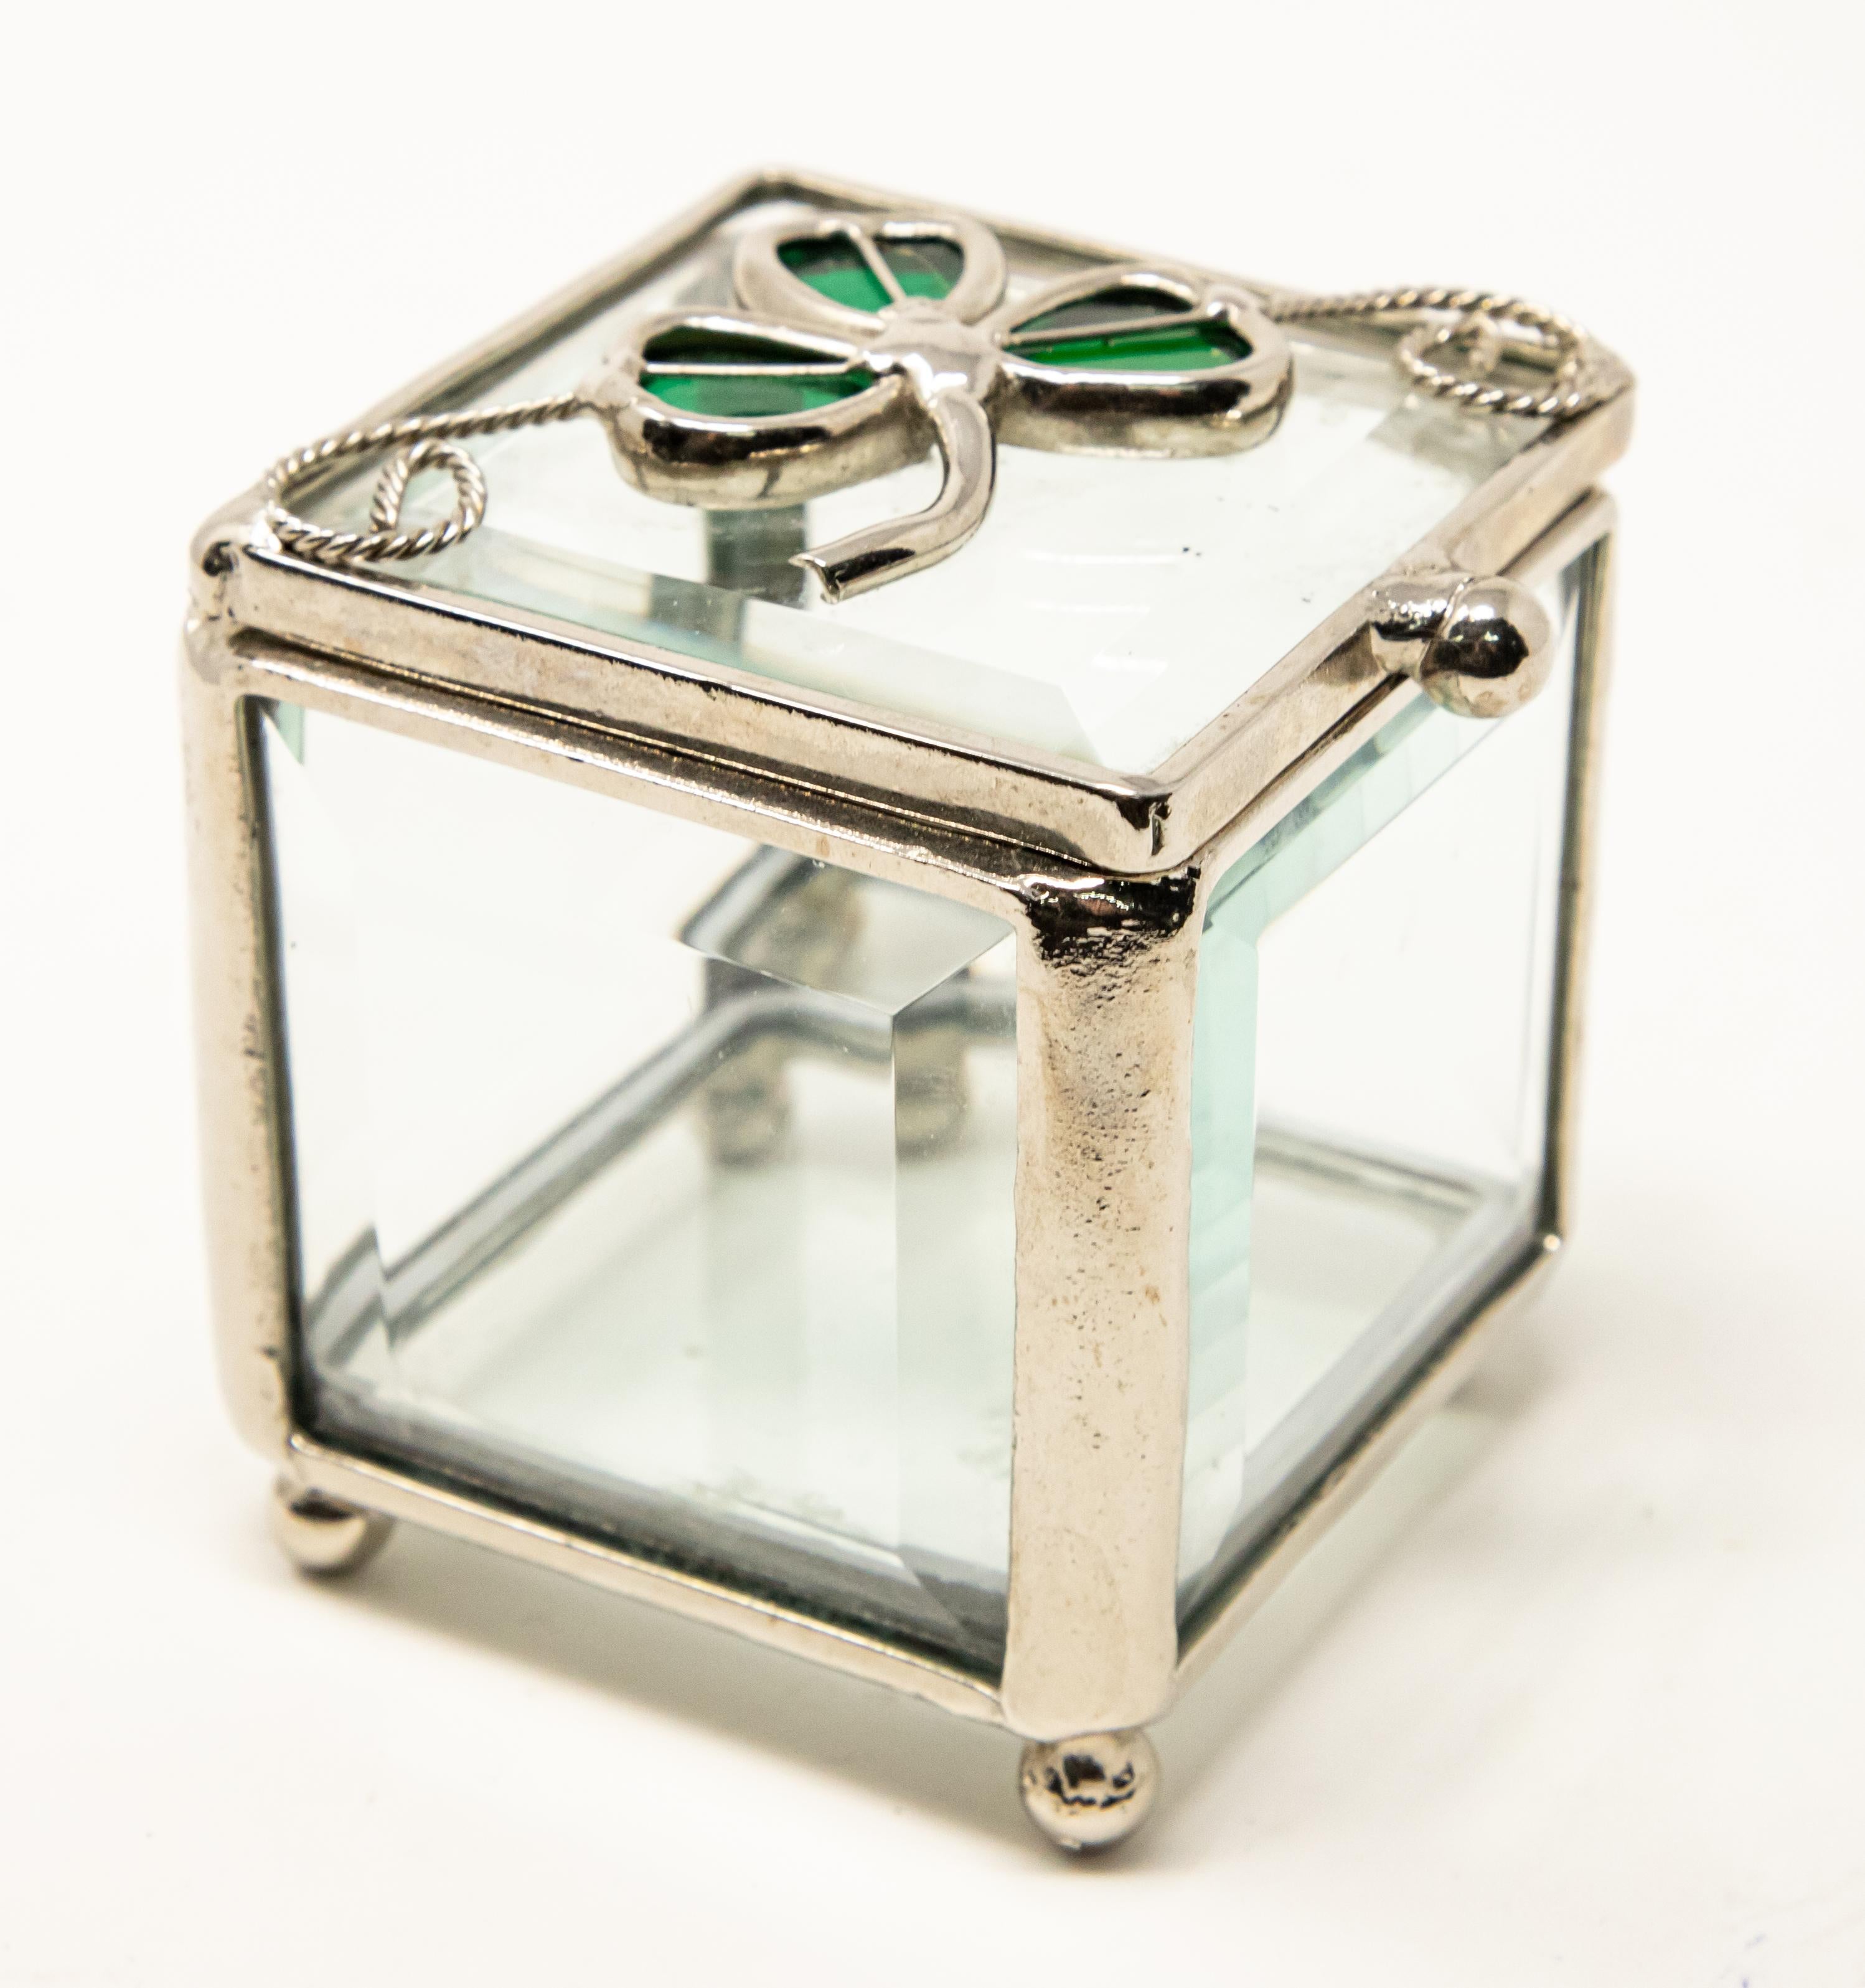 Offering this unmatchable sterling silver glass box with clover. Handcrafted sterling are the main structure to this stunning glass box. Beveled glass makes up all the sides. Has four ball feet on bottom. The top has a crafted clover and green